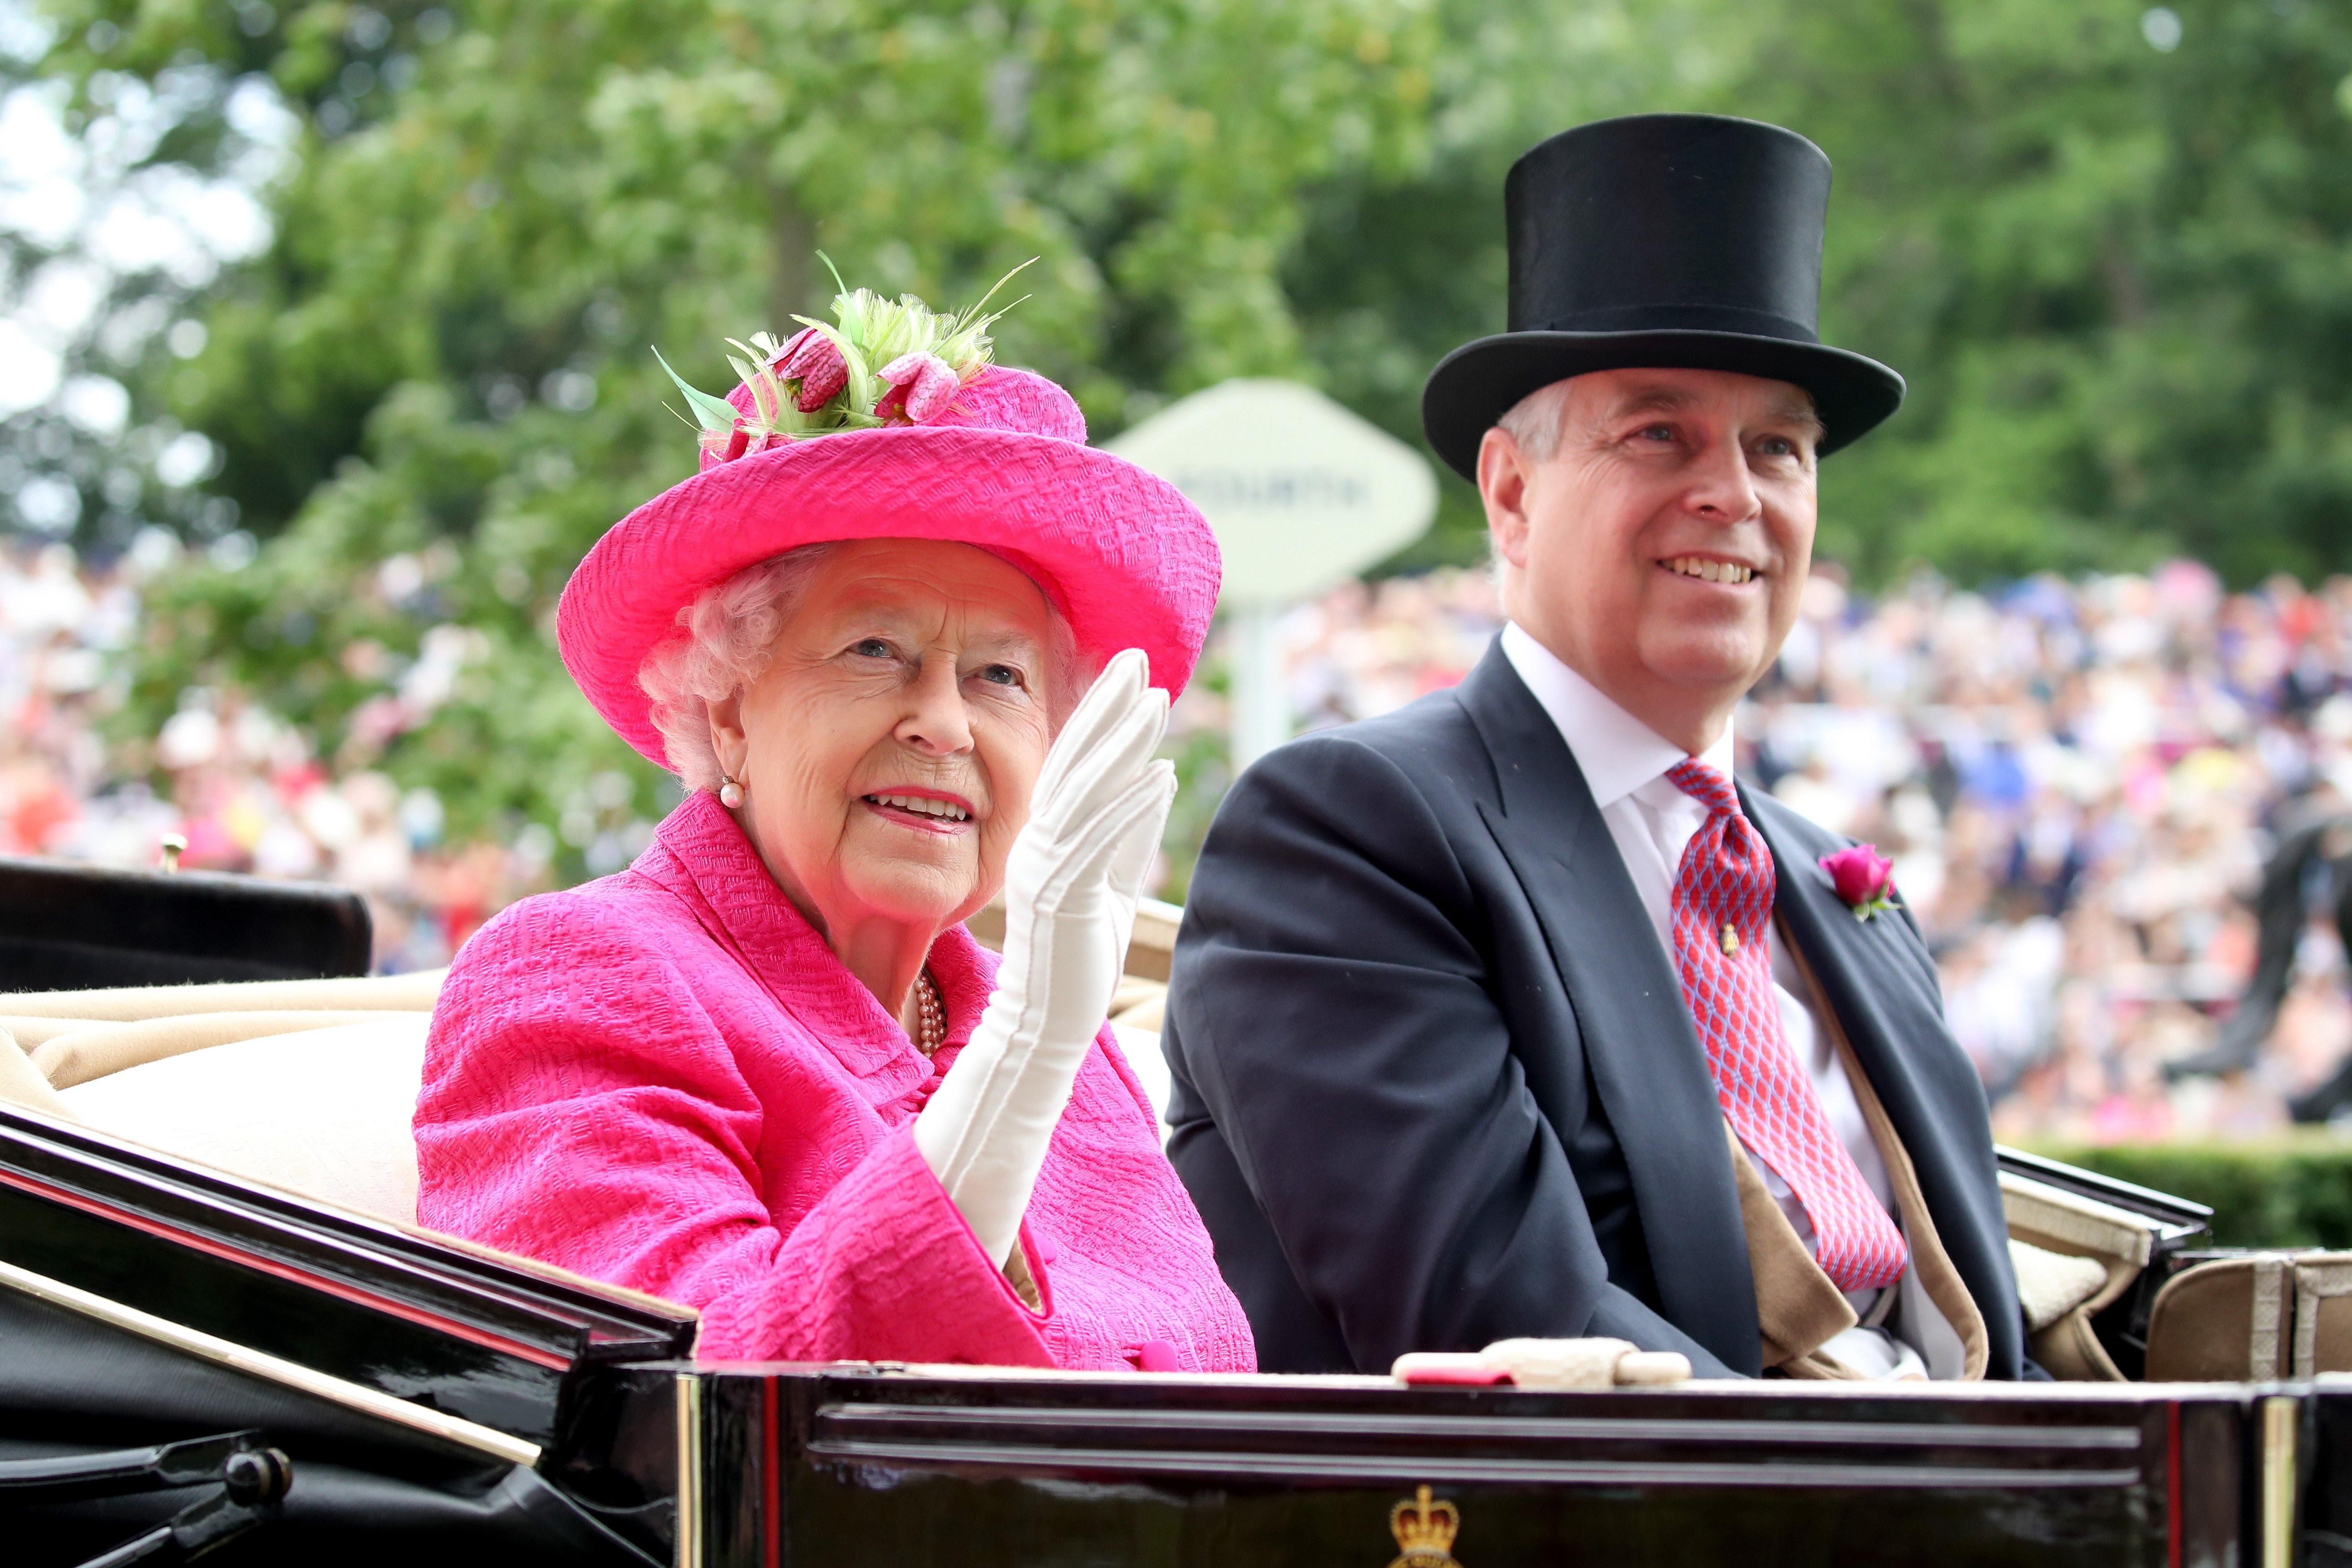 Queen Elizabeth II and Prince Andrew, Duke of York at The Royal Ascot 2017 at Ascot Racecourse on June 22, 2017 in Ascot, England. | Source: Getty Images